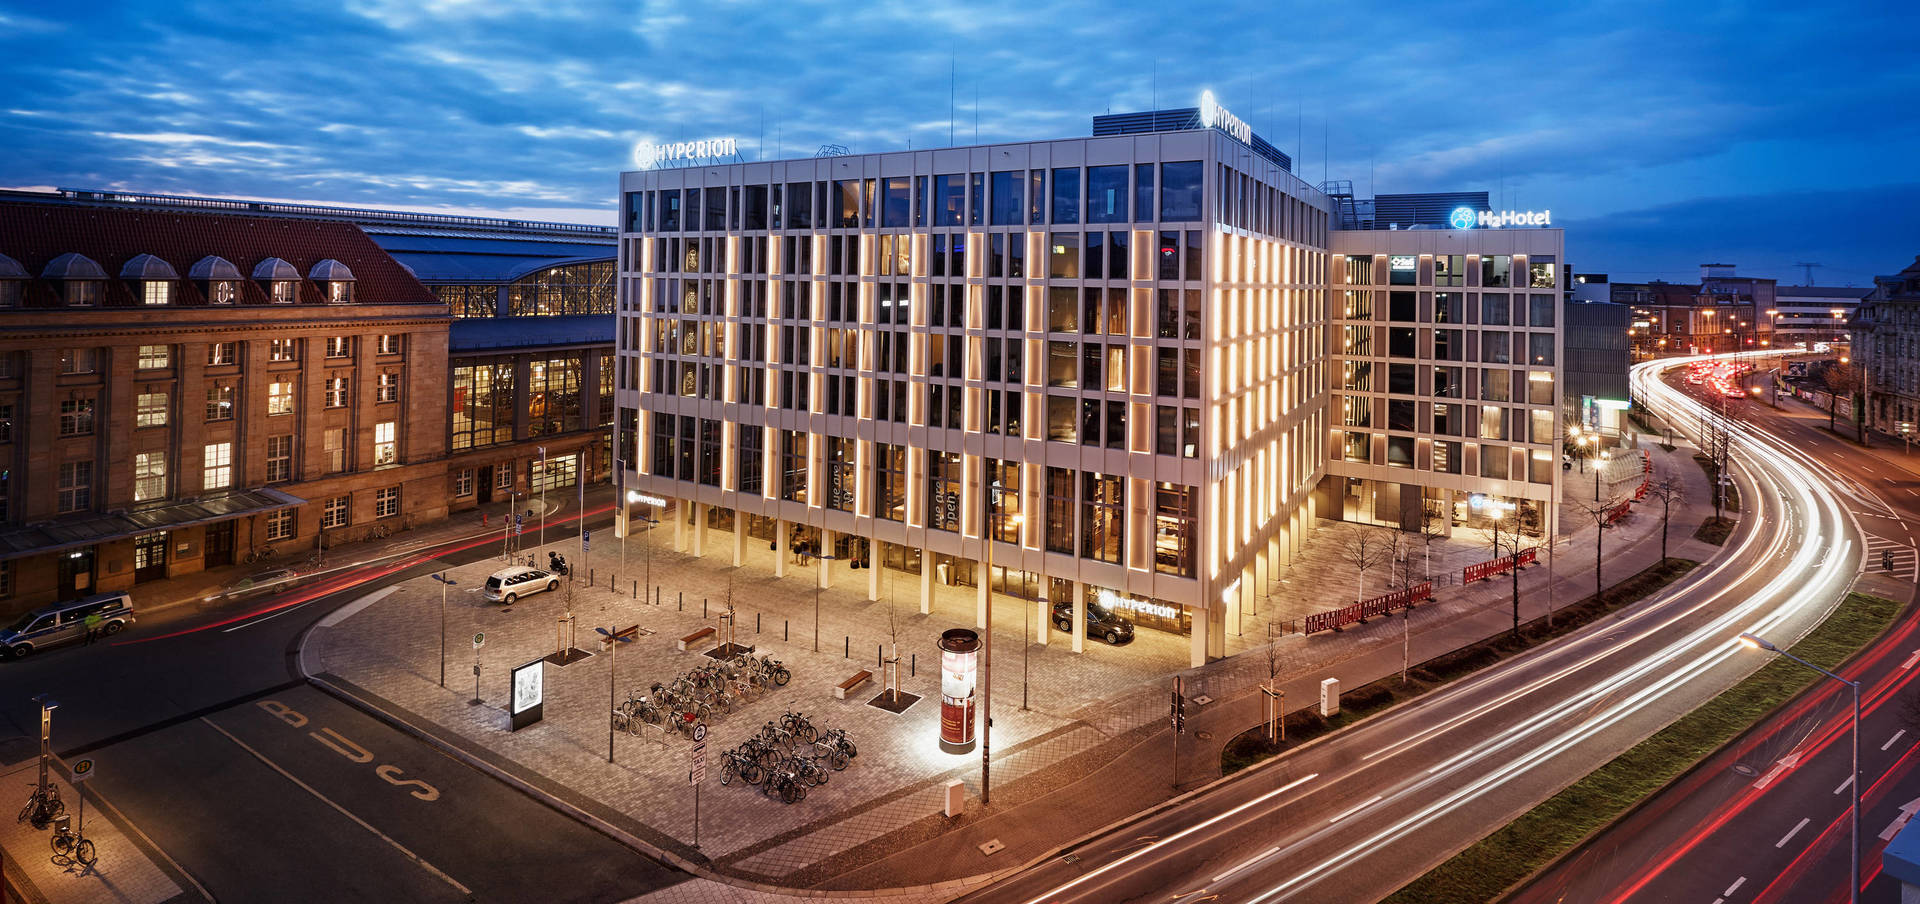 Exteroir view of the Hyperion Hotel Leipzig - Official website